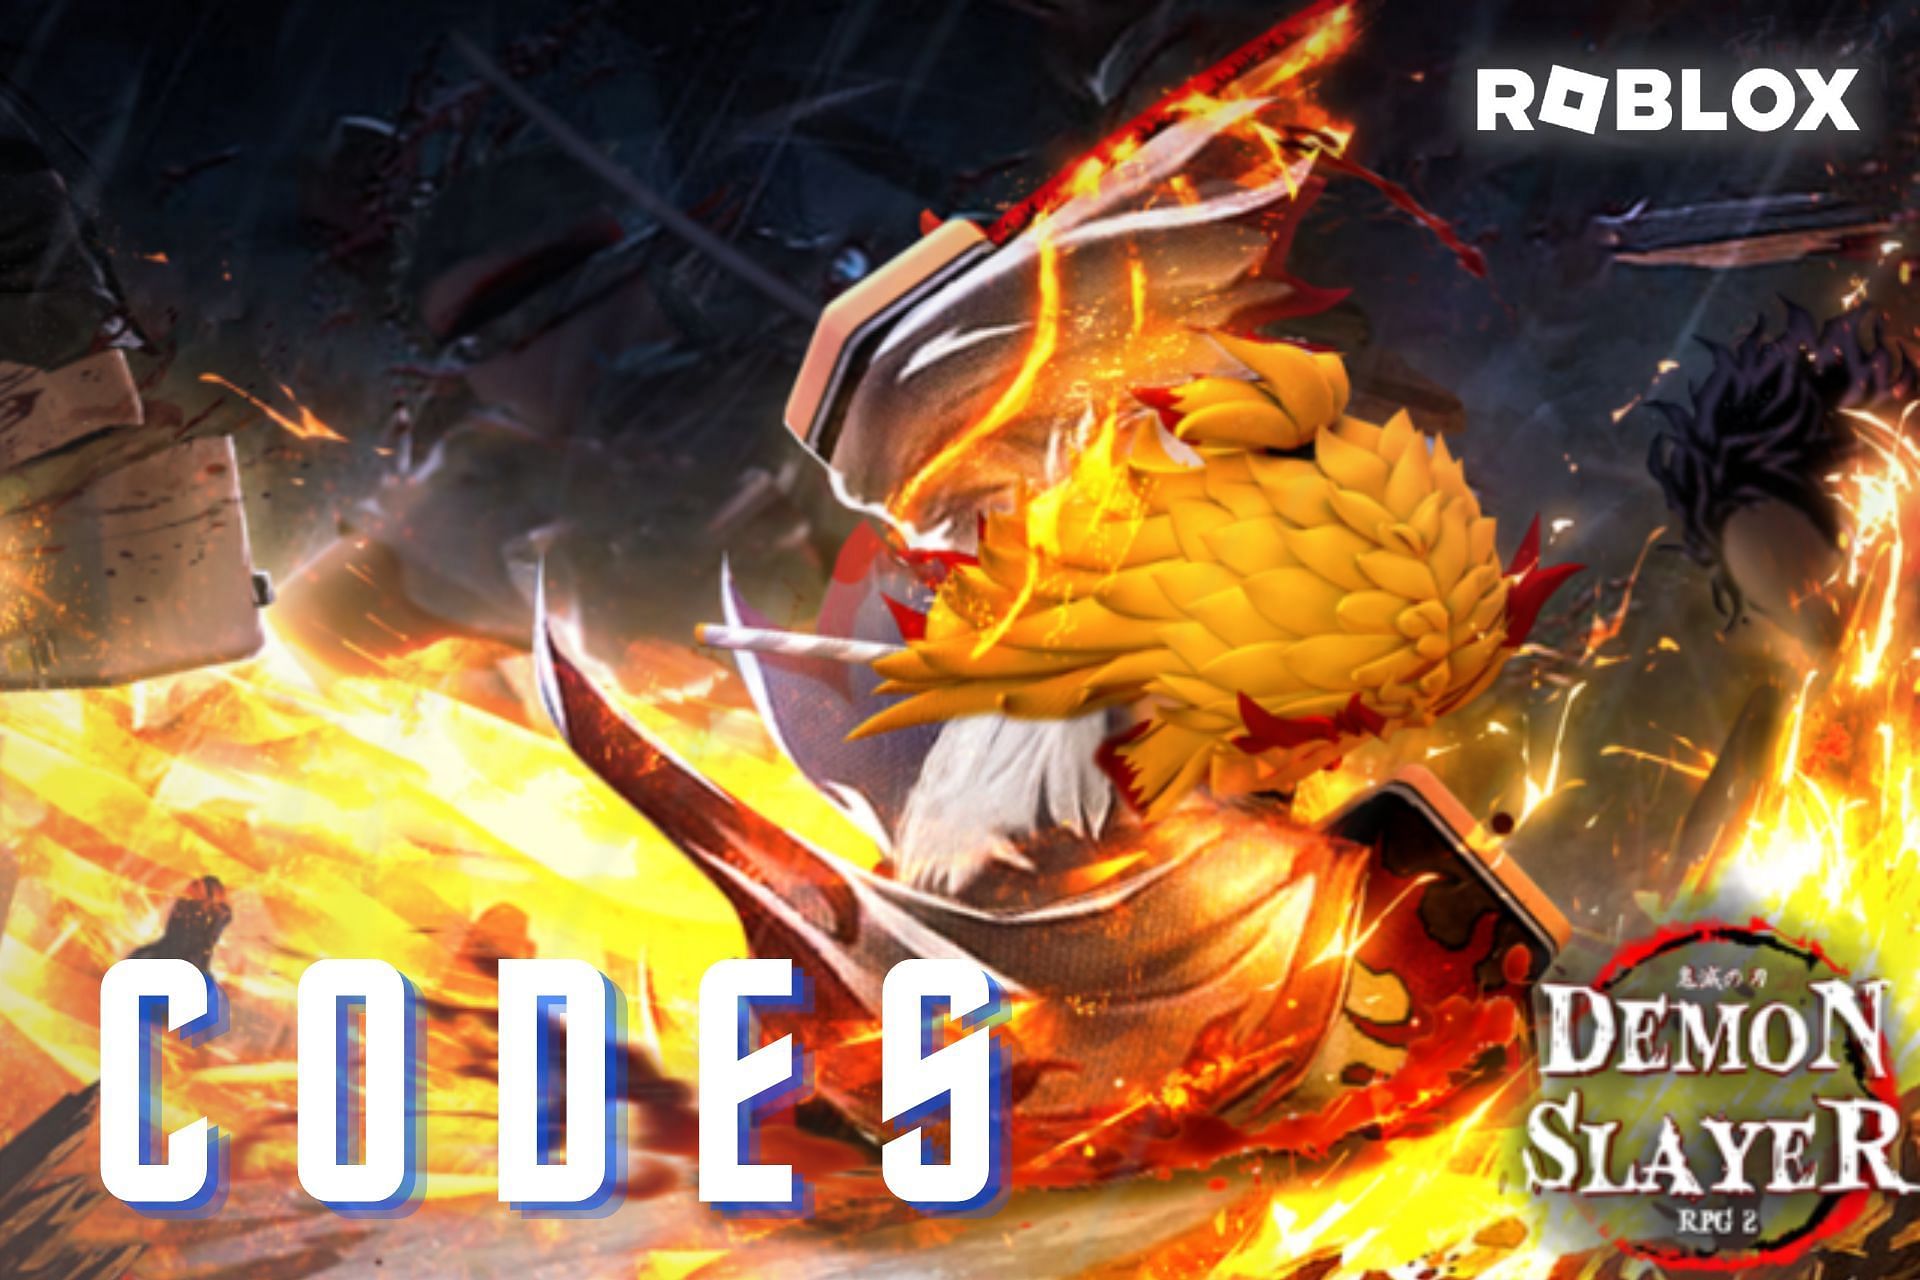 ALL 5 *NEW* CODES IN DEMON SLAYER RPG 2 (ROBLOX) [FEBRUARY-18-2022